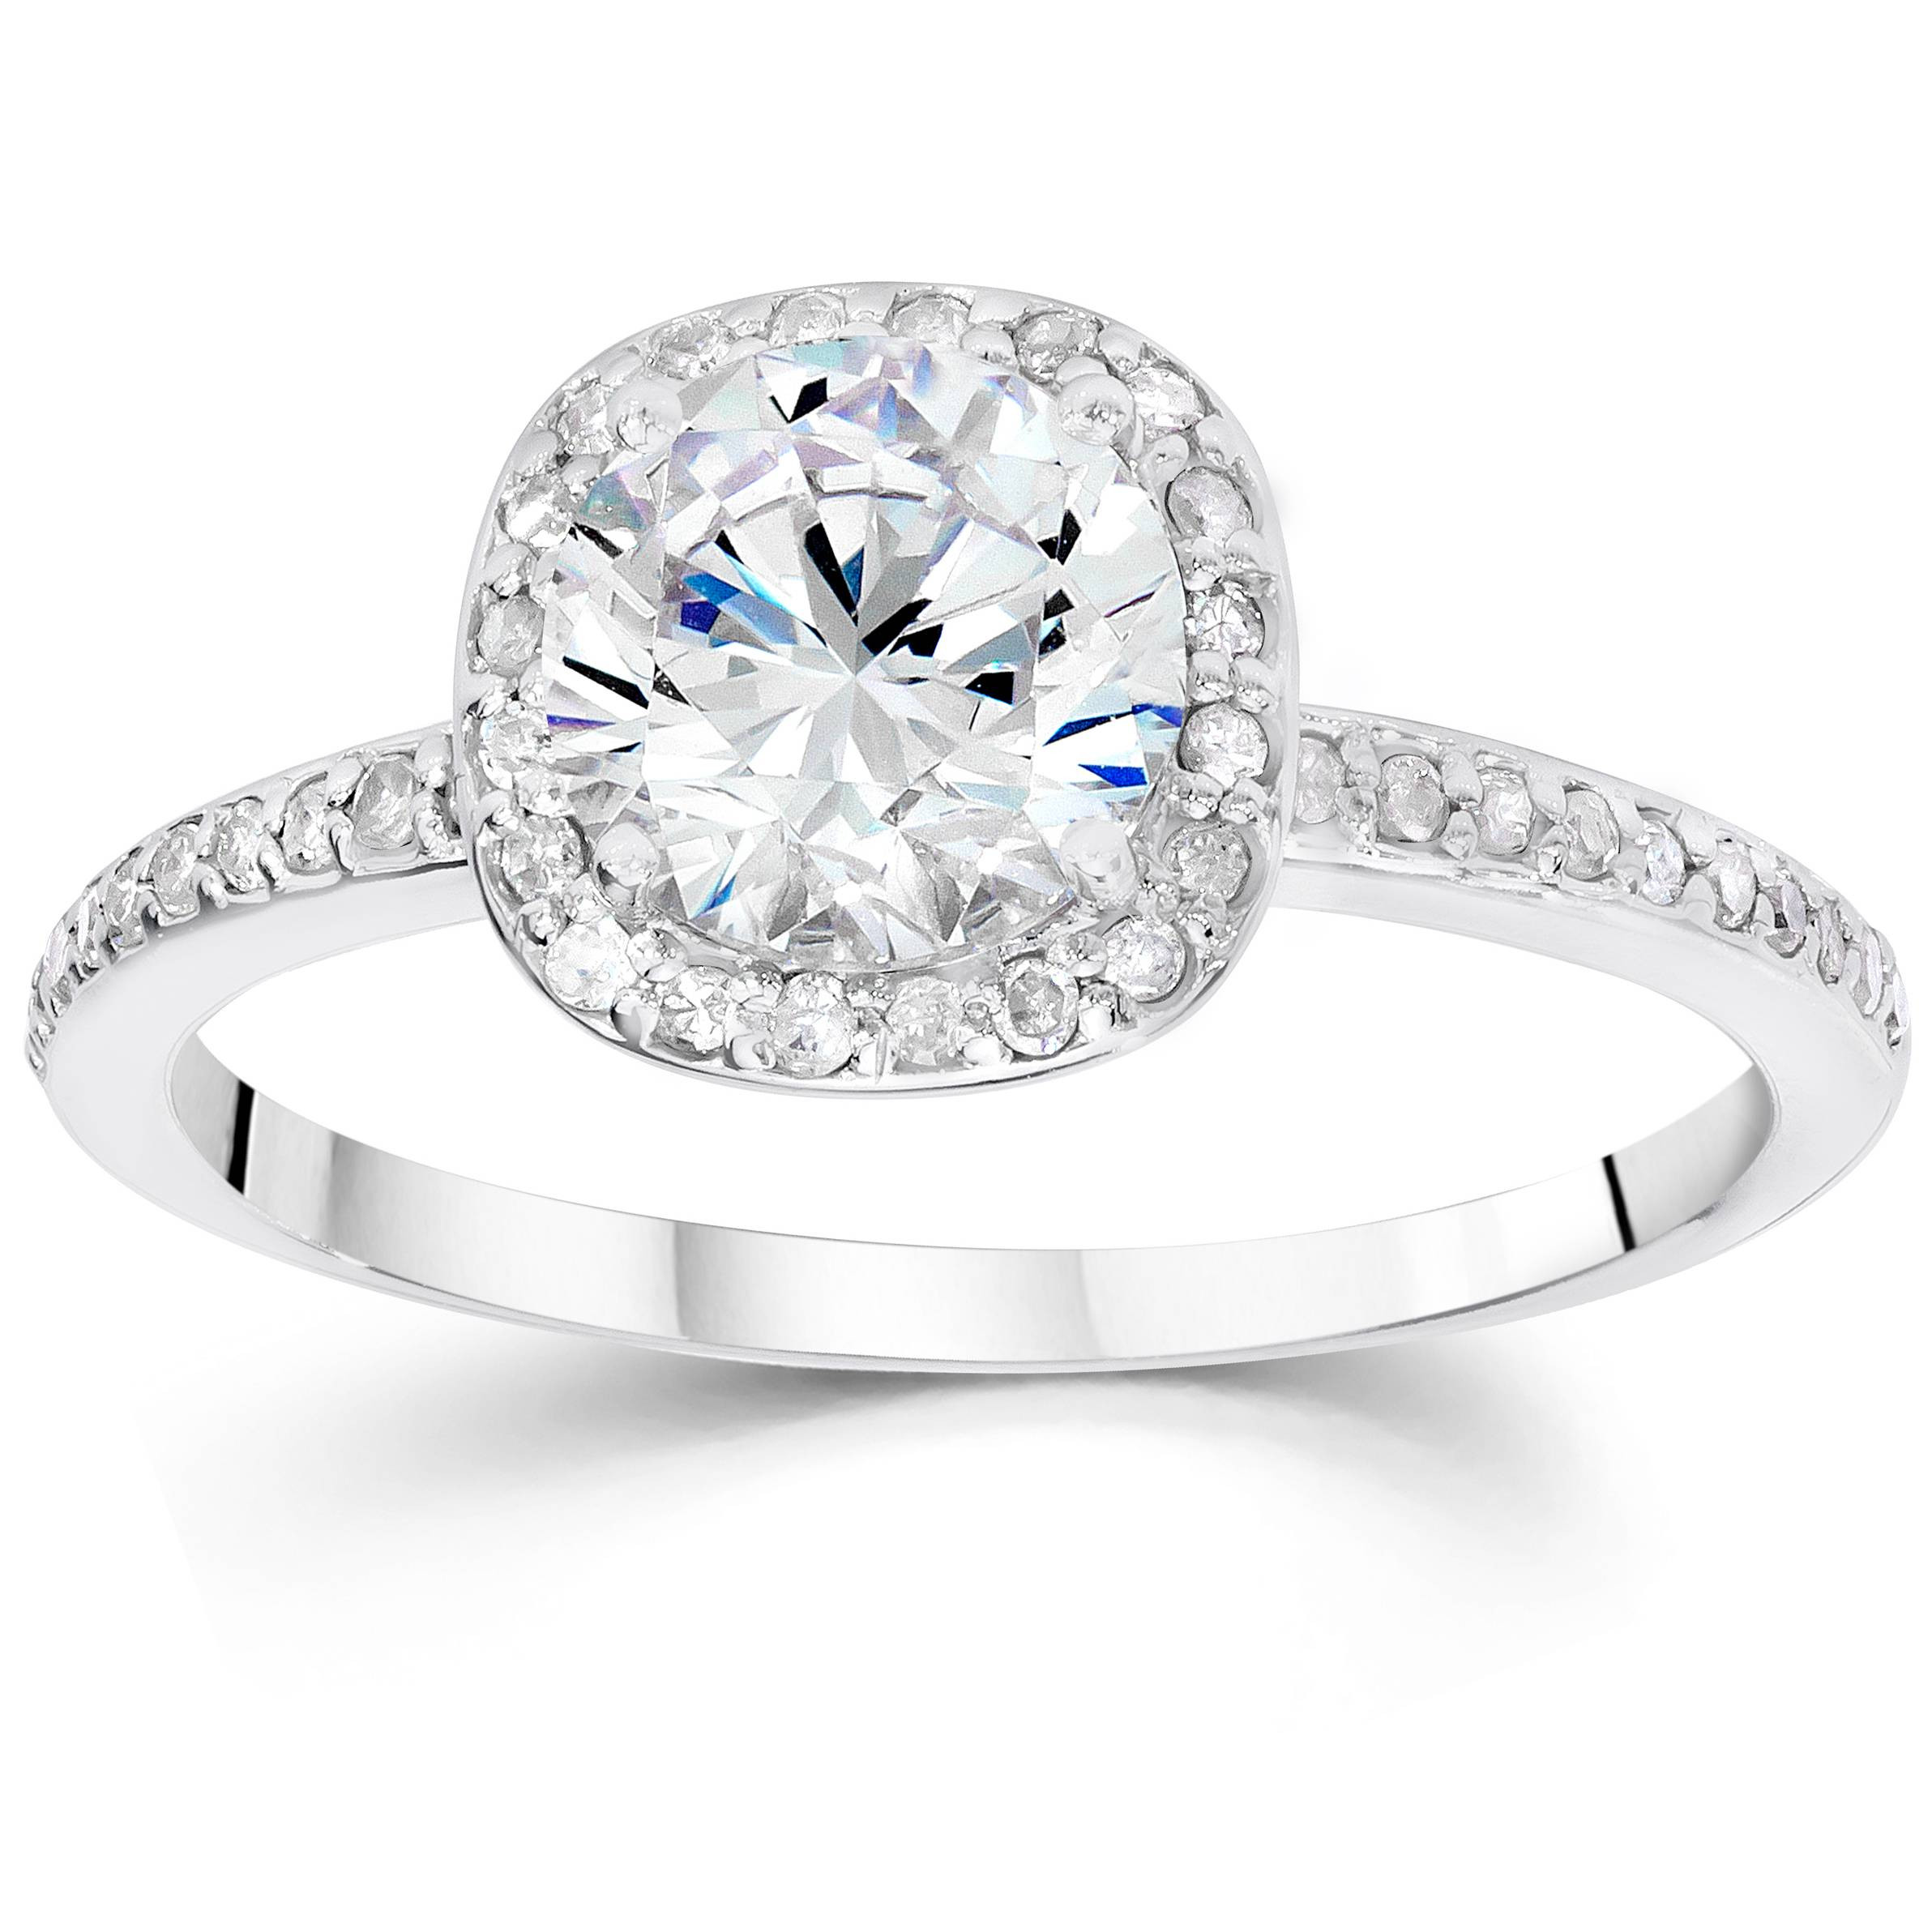 Round Solitaire Diamond Engagement Rings
 5 8ct Cushion Halo Diamond Engagement Ring 14K White Gold